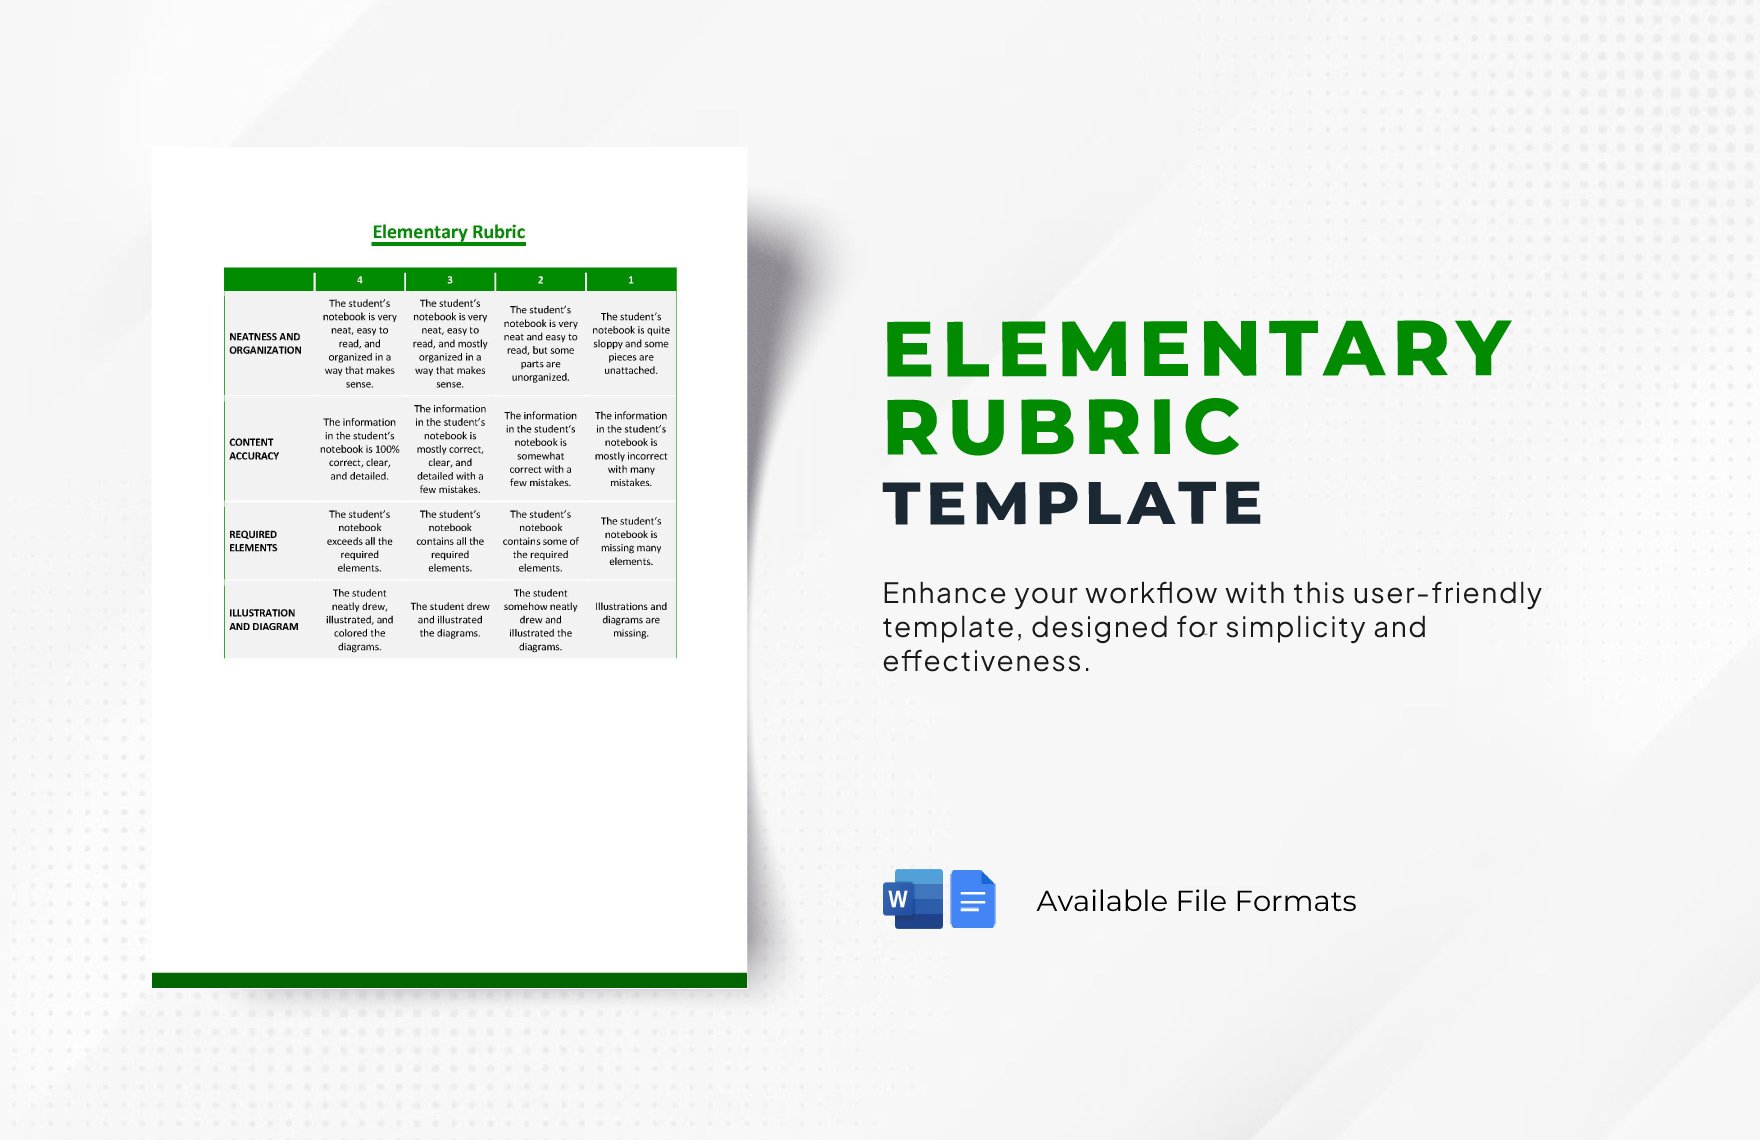 Elementary Rubric Template in Word, Google Docs